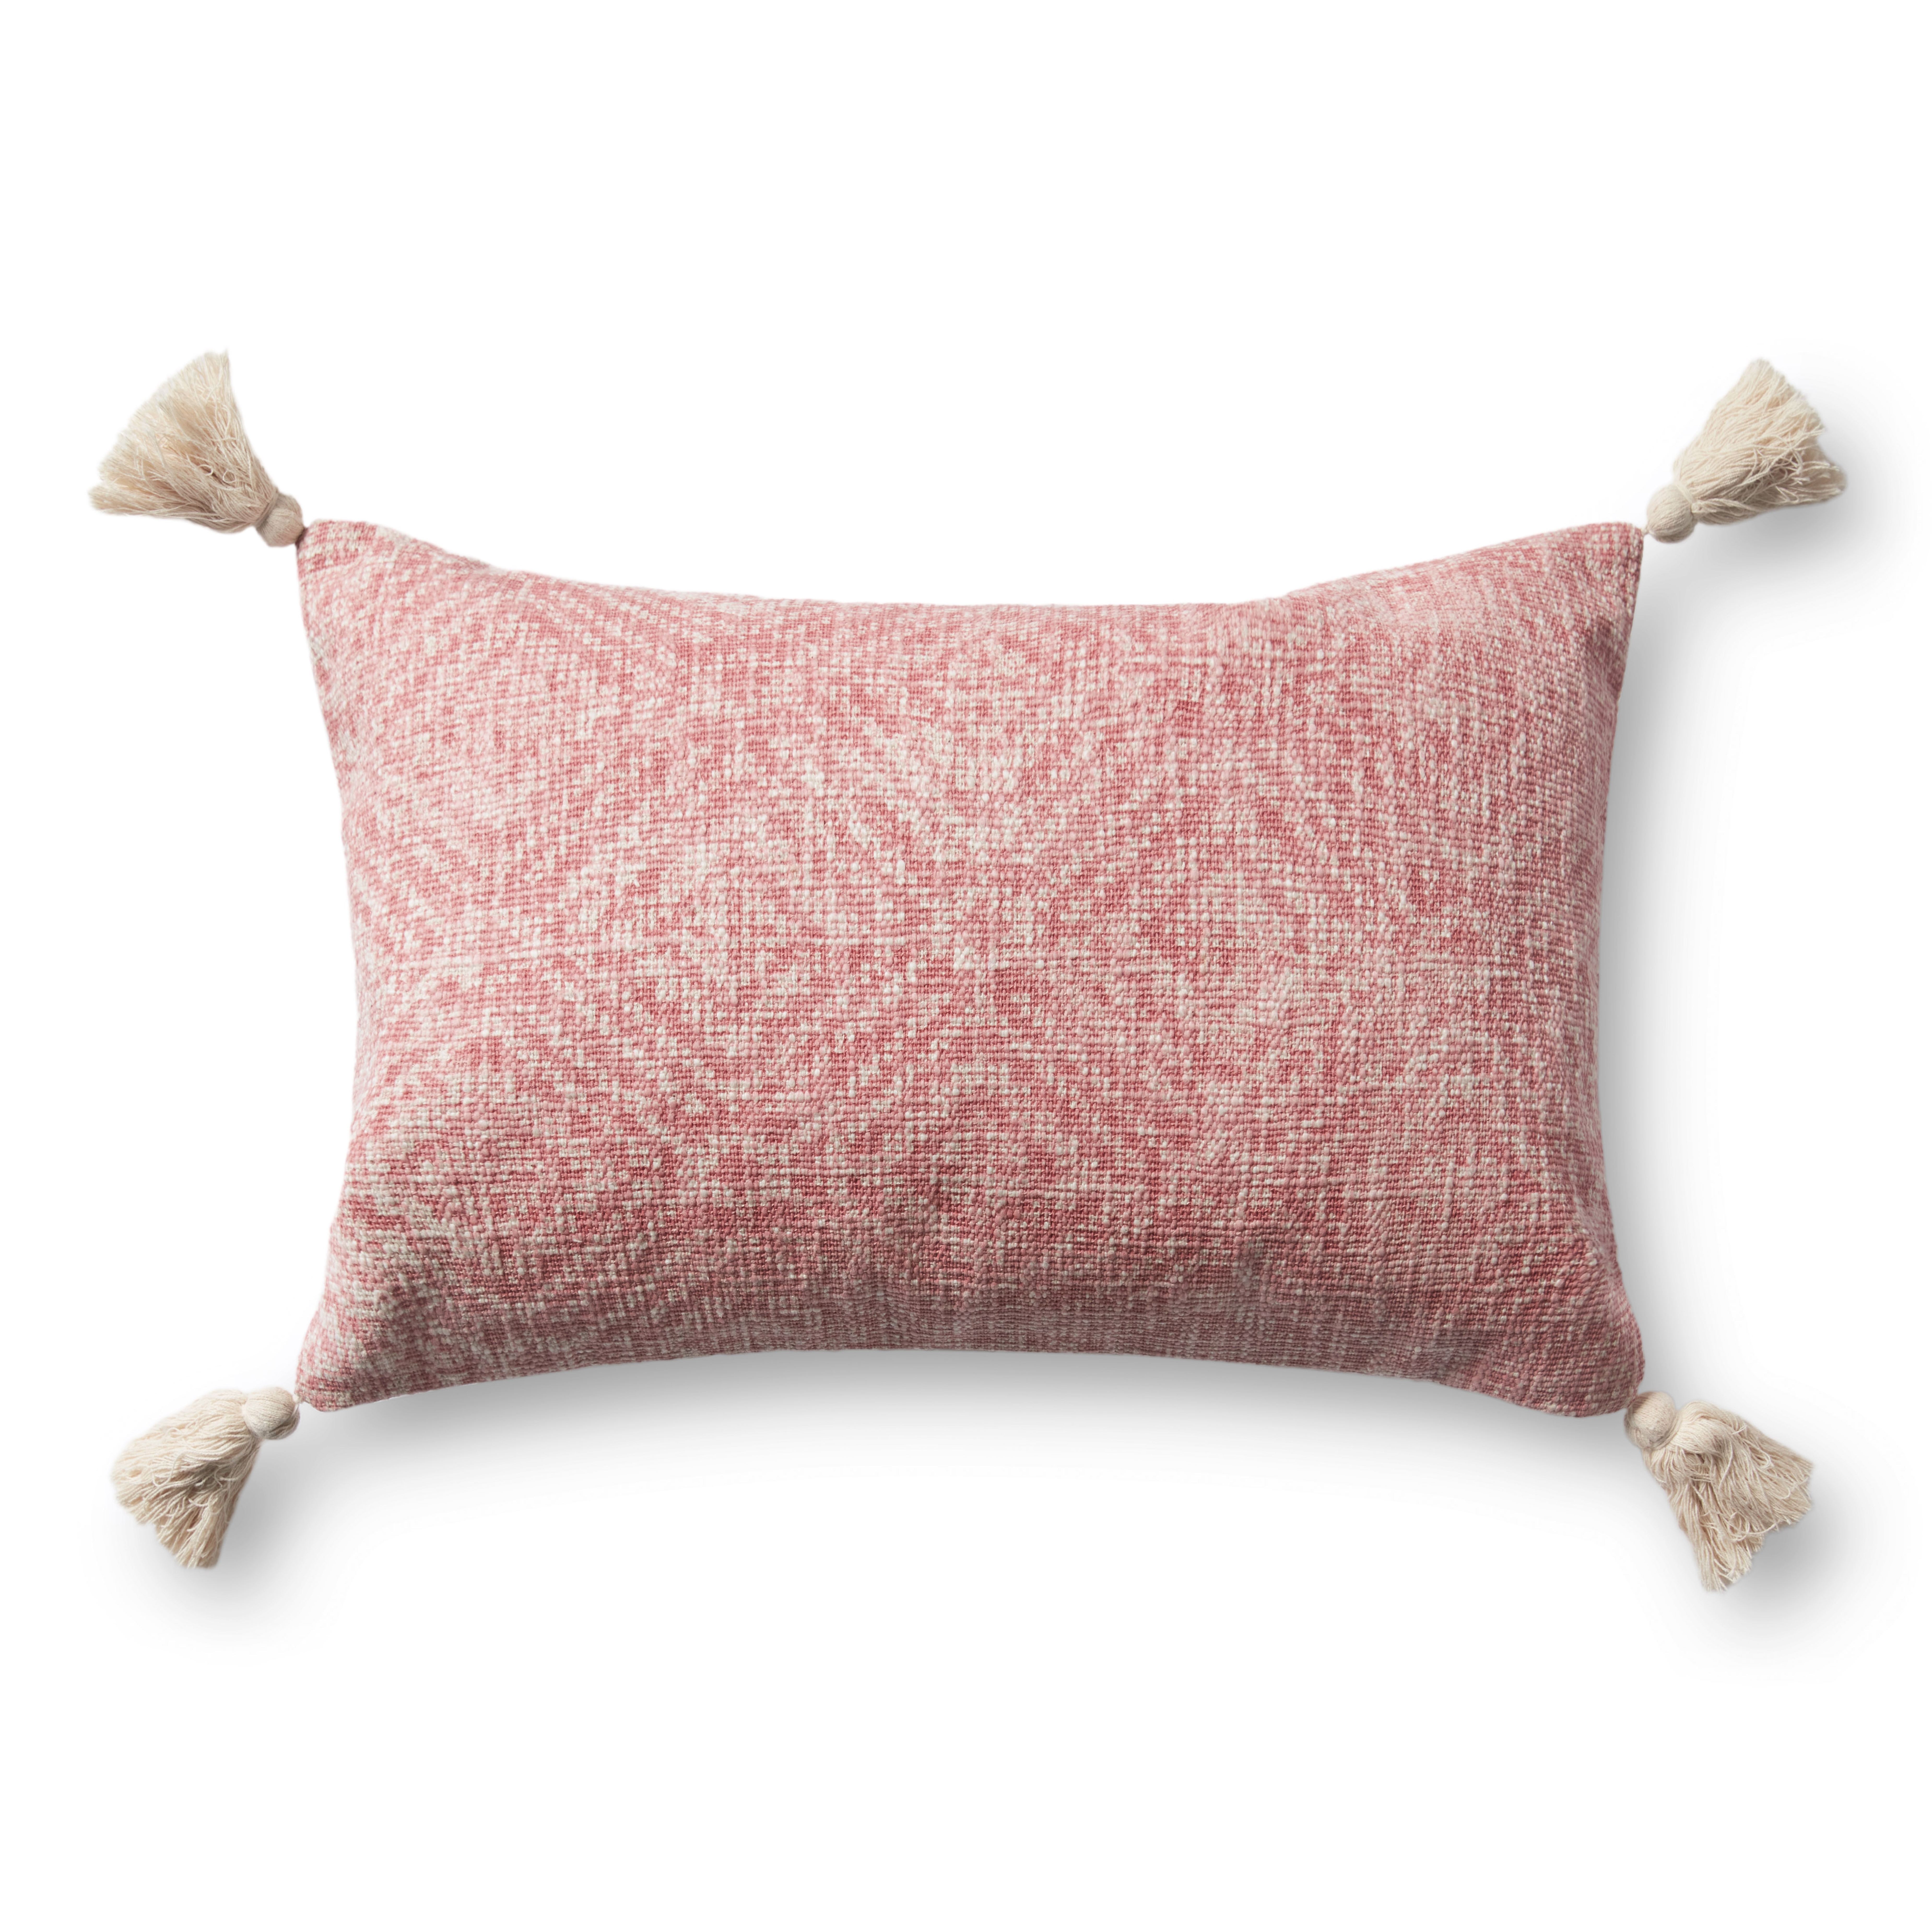 Loloi Pillows P0621 Pink 13" x 21" Cover Only - Loloi Rugs